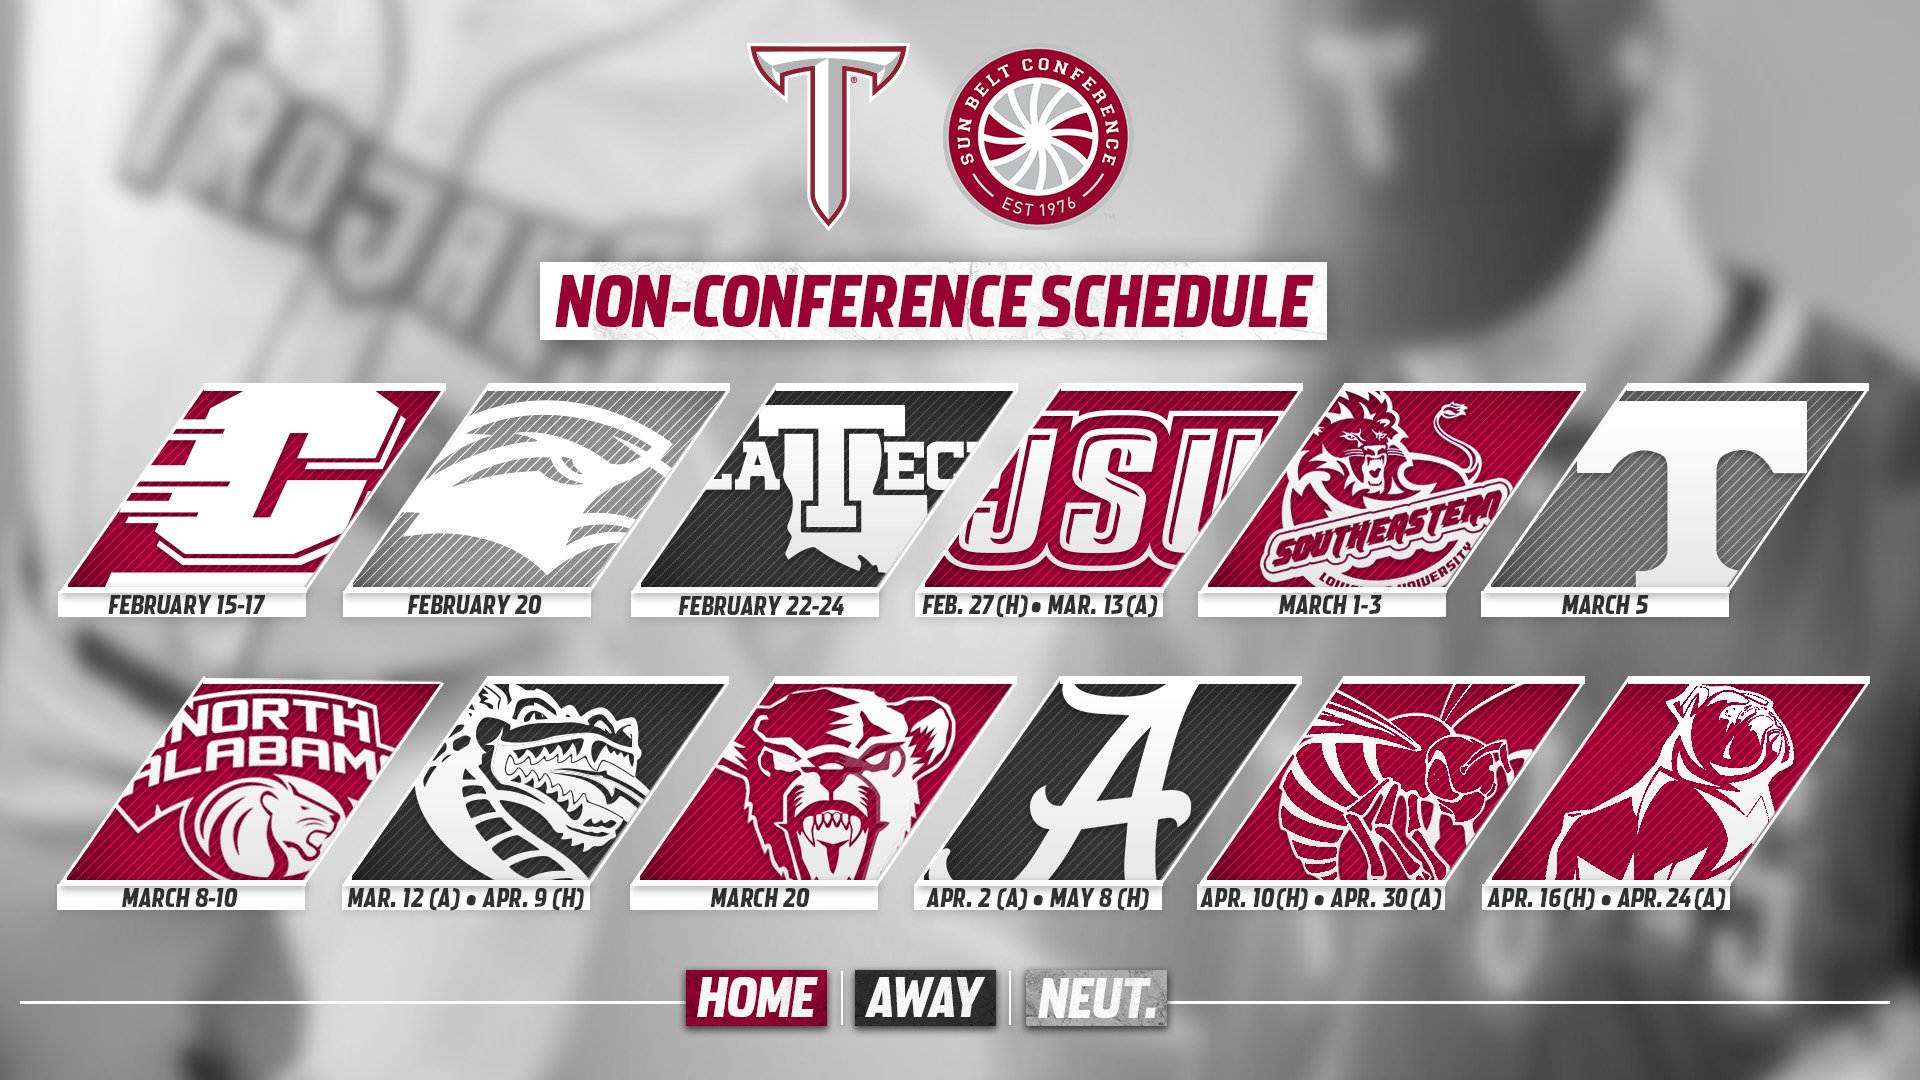 Troy Baseball ⚔️ on Twitter "⚔️ SCHEDULE RELEASE ⚔️ Mark your 📆 for